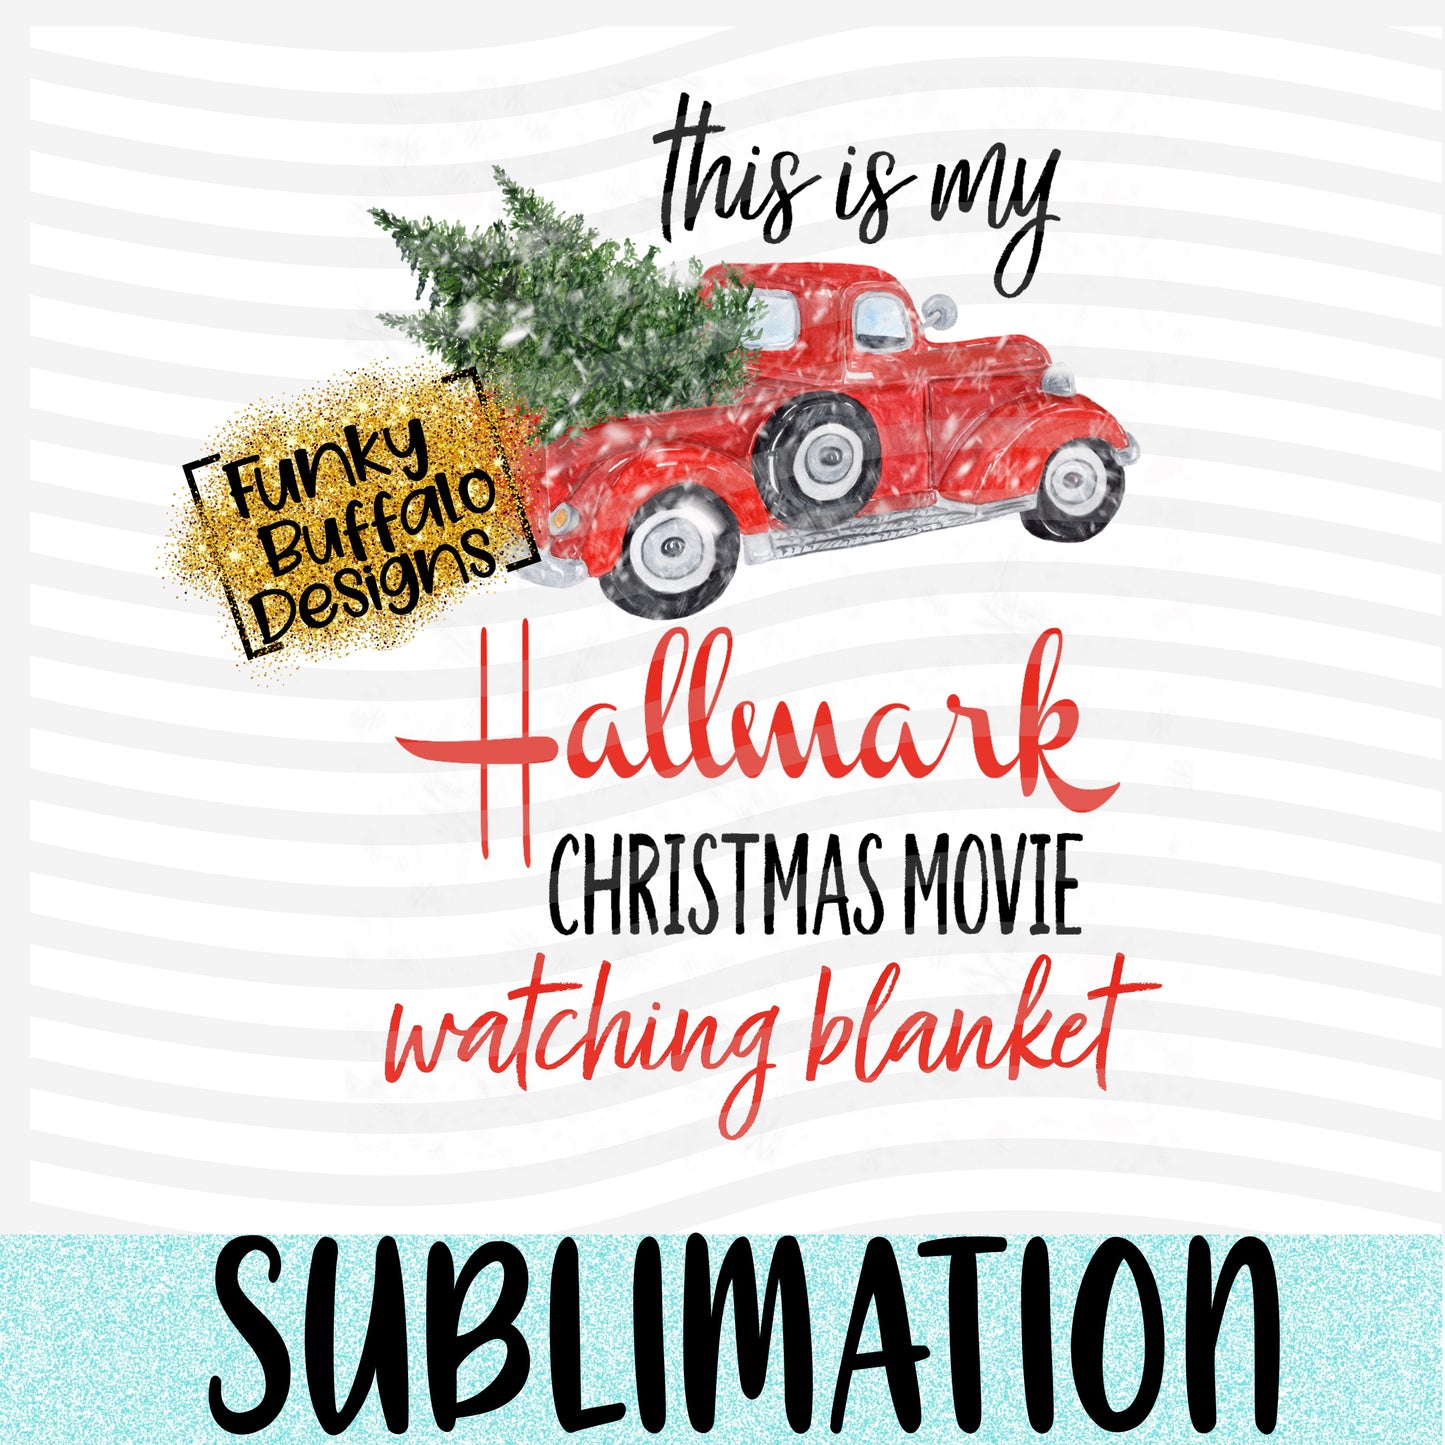 Hallmark Watching Blanket (red letters) Sublimation